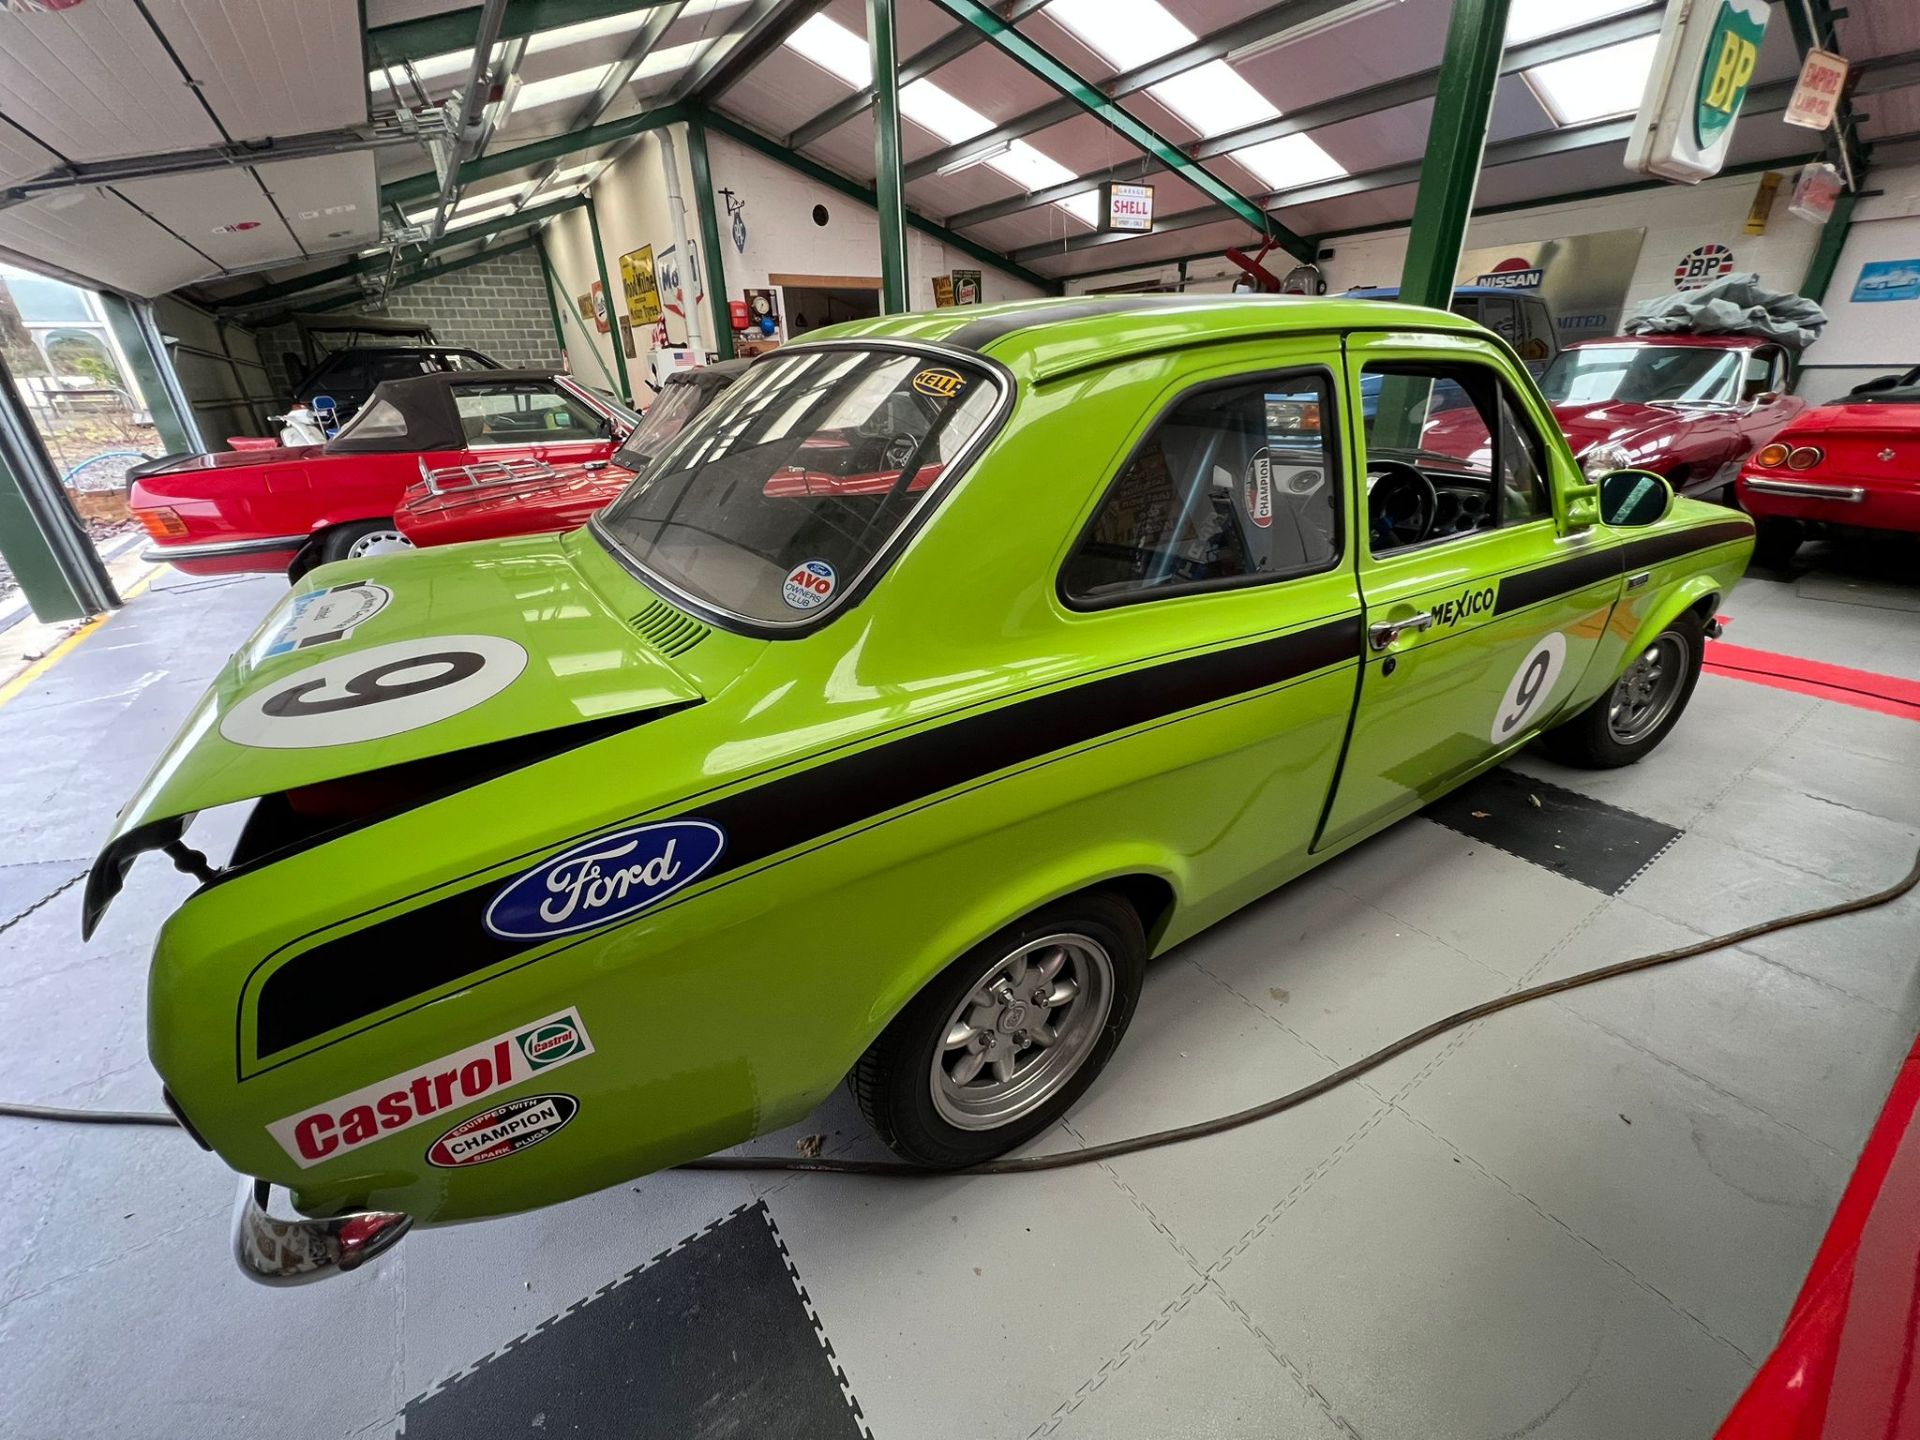 Ford Escort Mk1 X-Sport Mexico Competition Car 1973 - Image 16 of 16